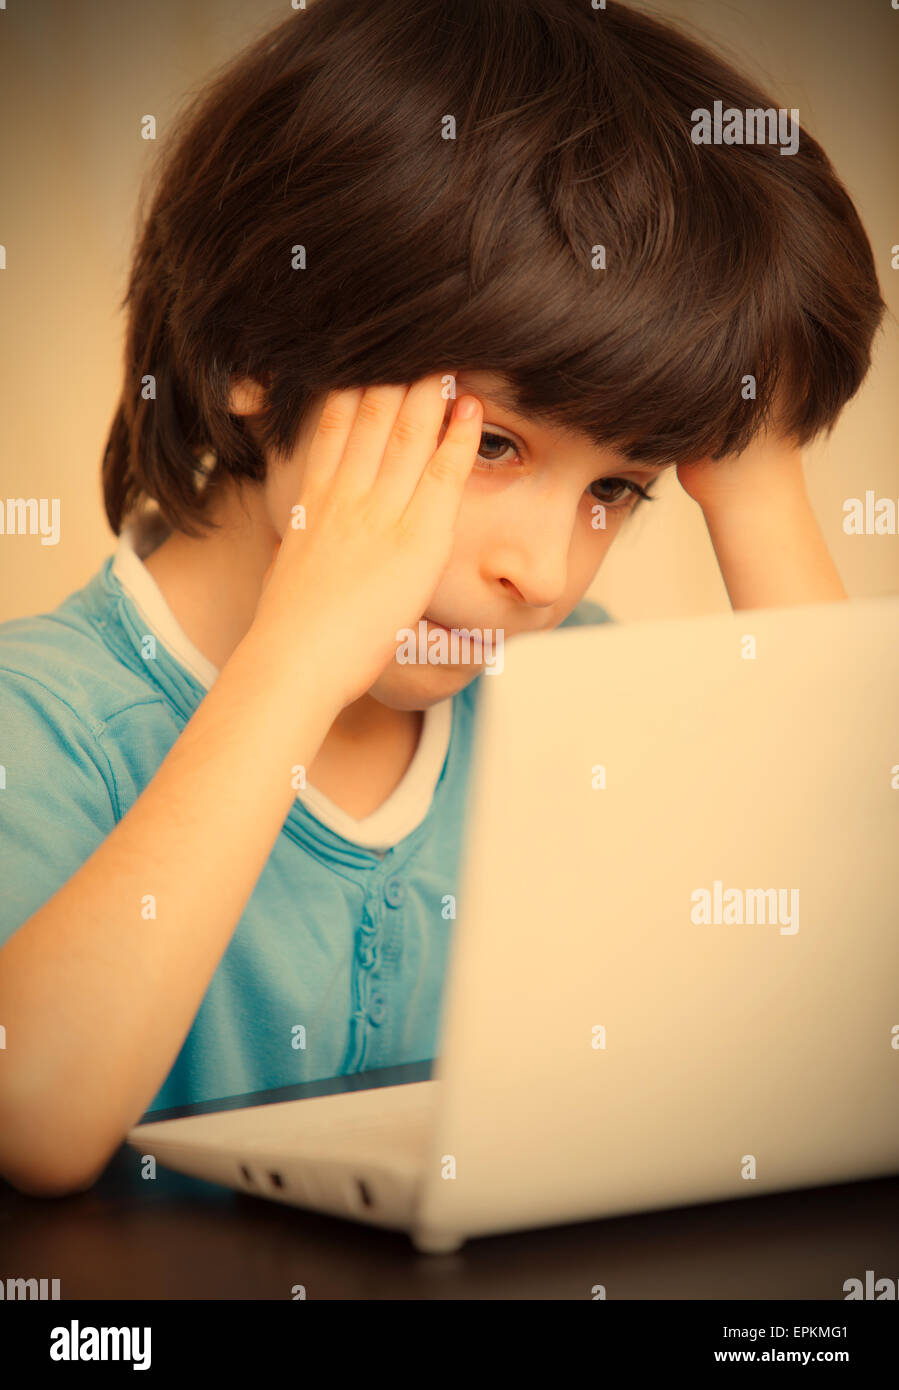 student to solve complex problems Stock Photo